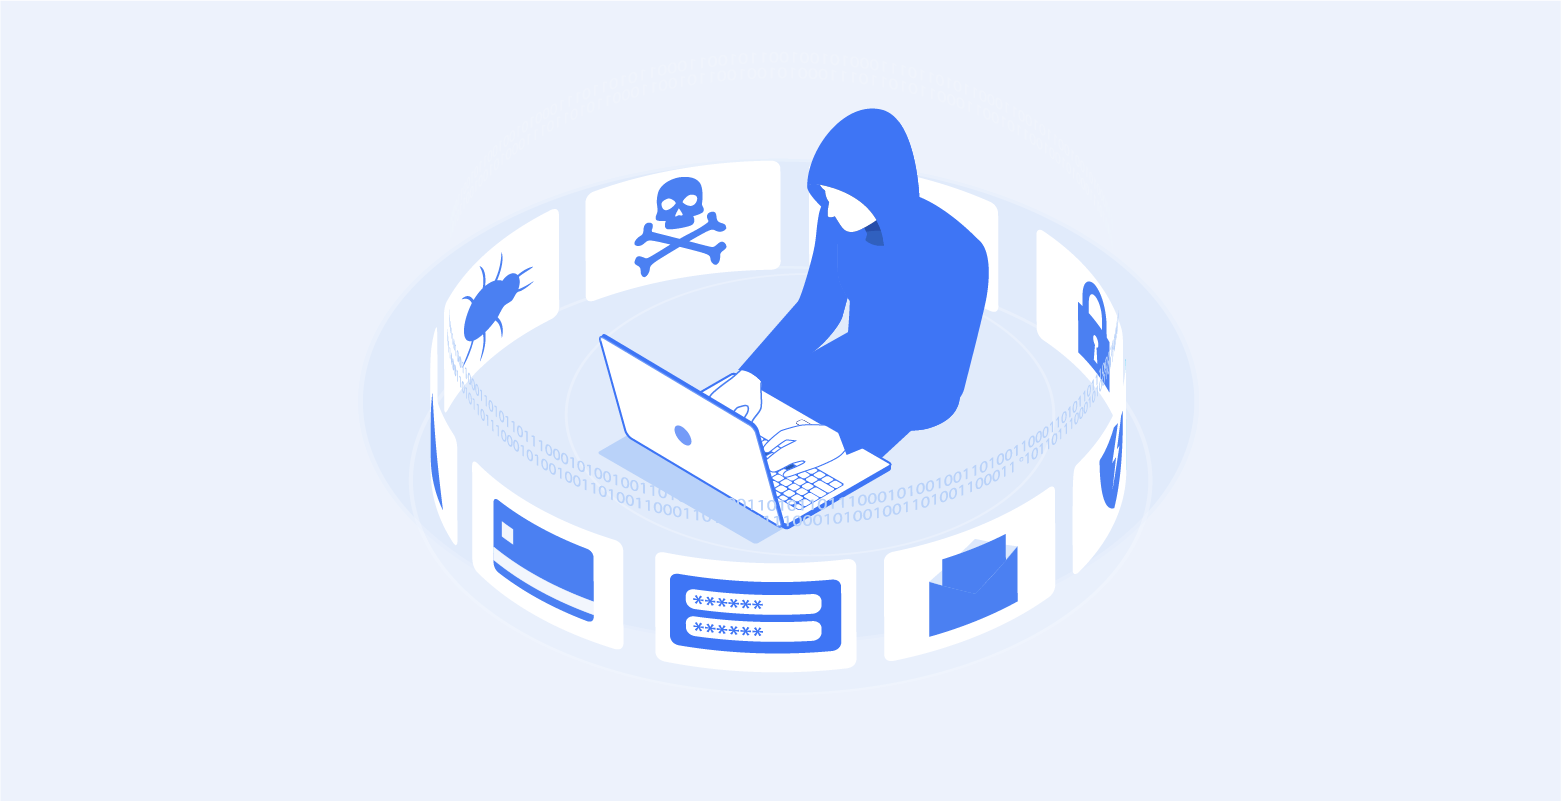 Simple blue graphic of hoodie hacker on a laptop surrounded by virtual cyber threats